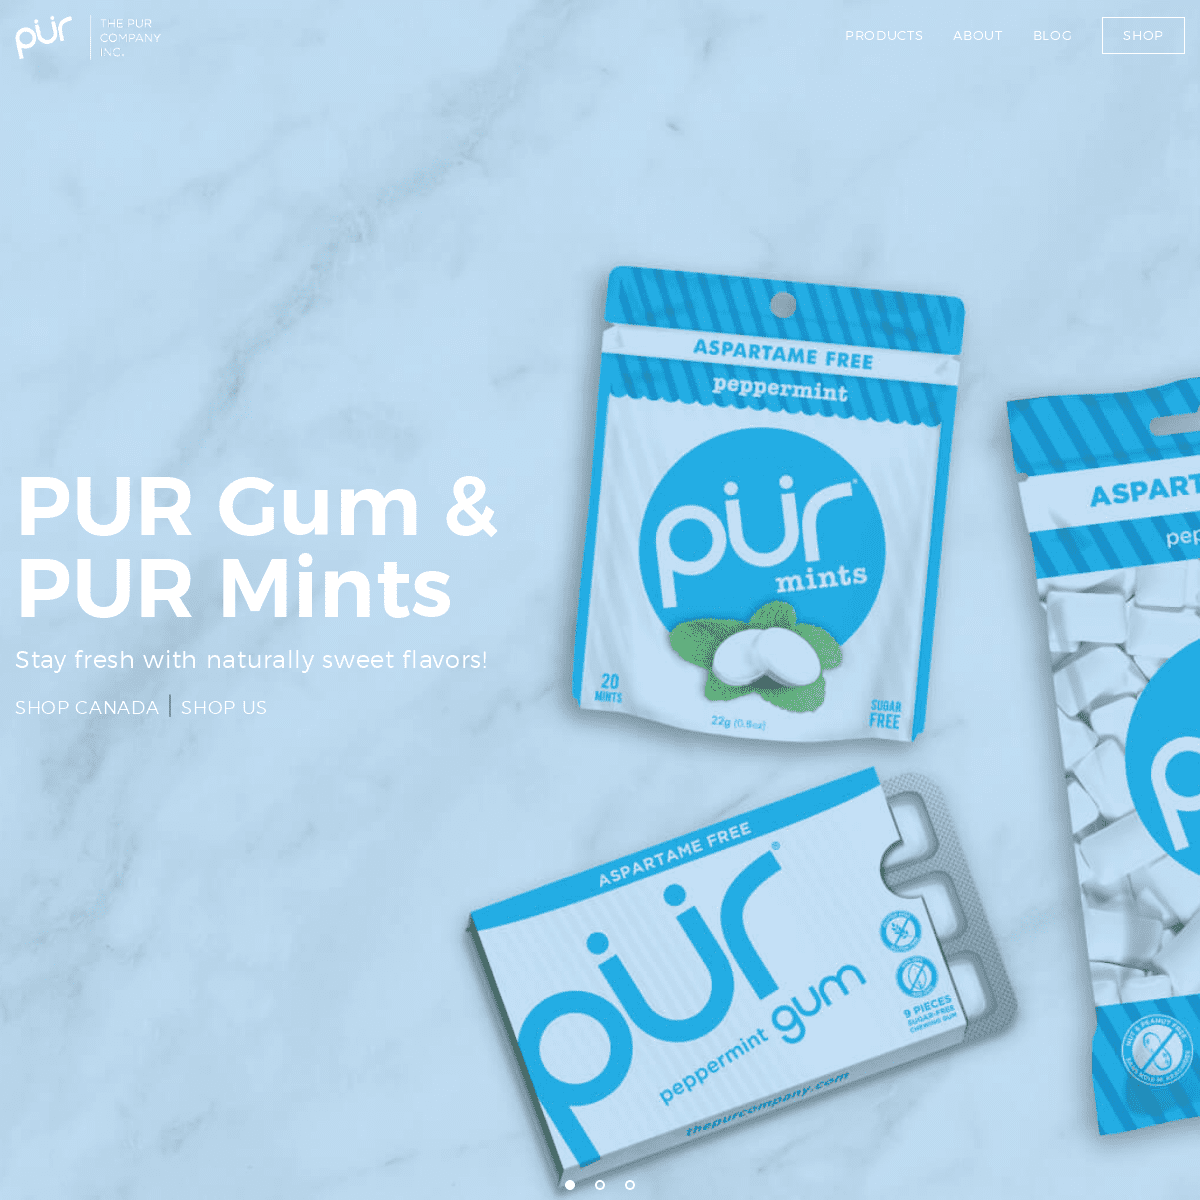  The PUR Company - Makers of the #1 selling aspartame-free gum and mints.